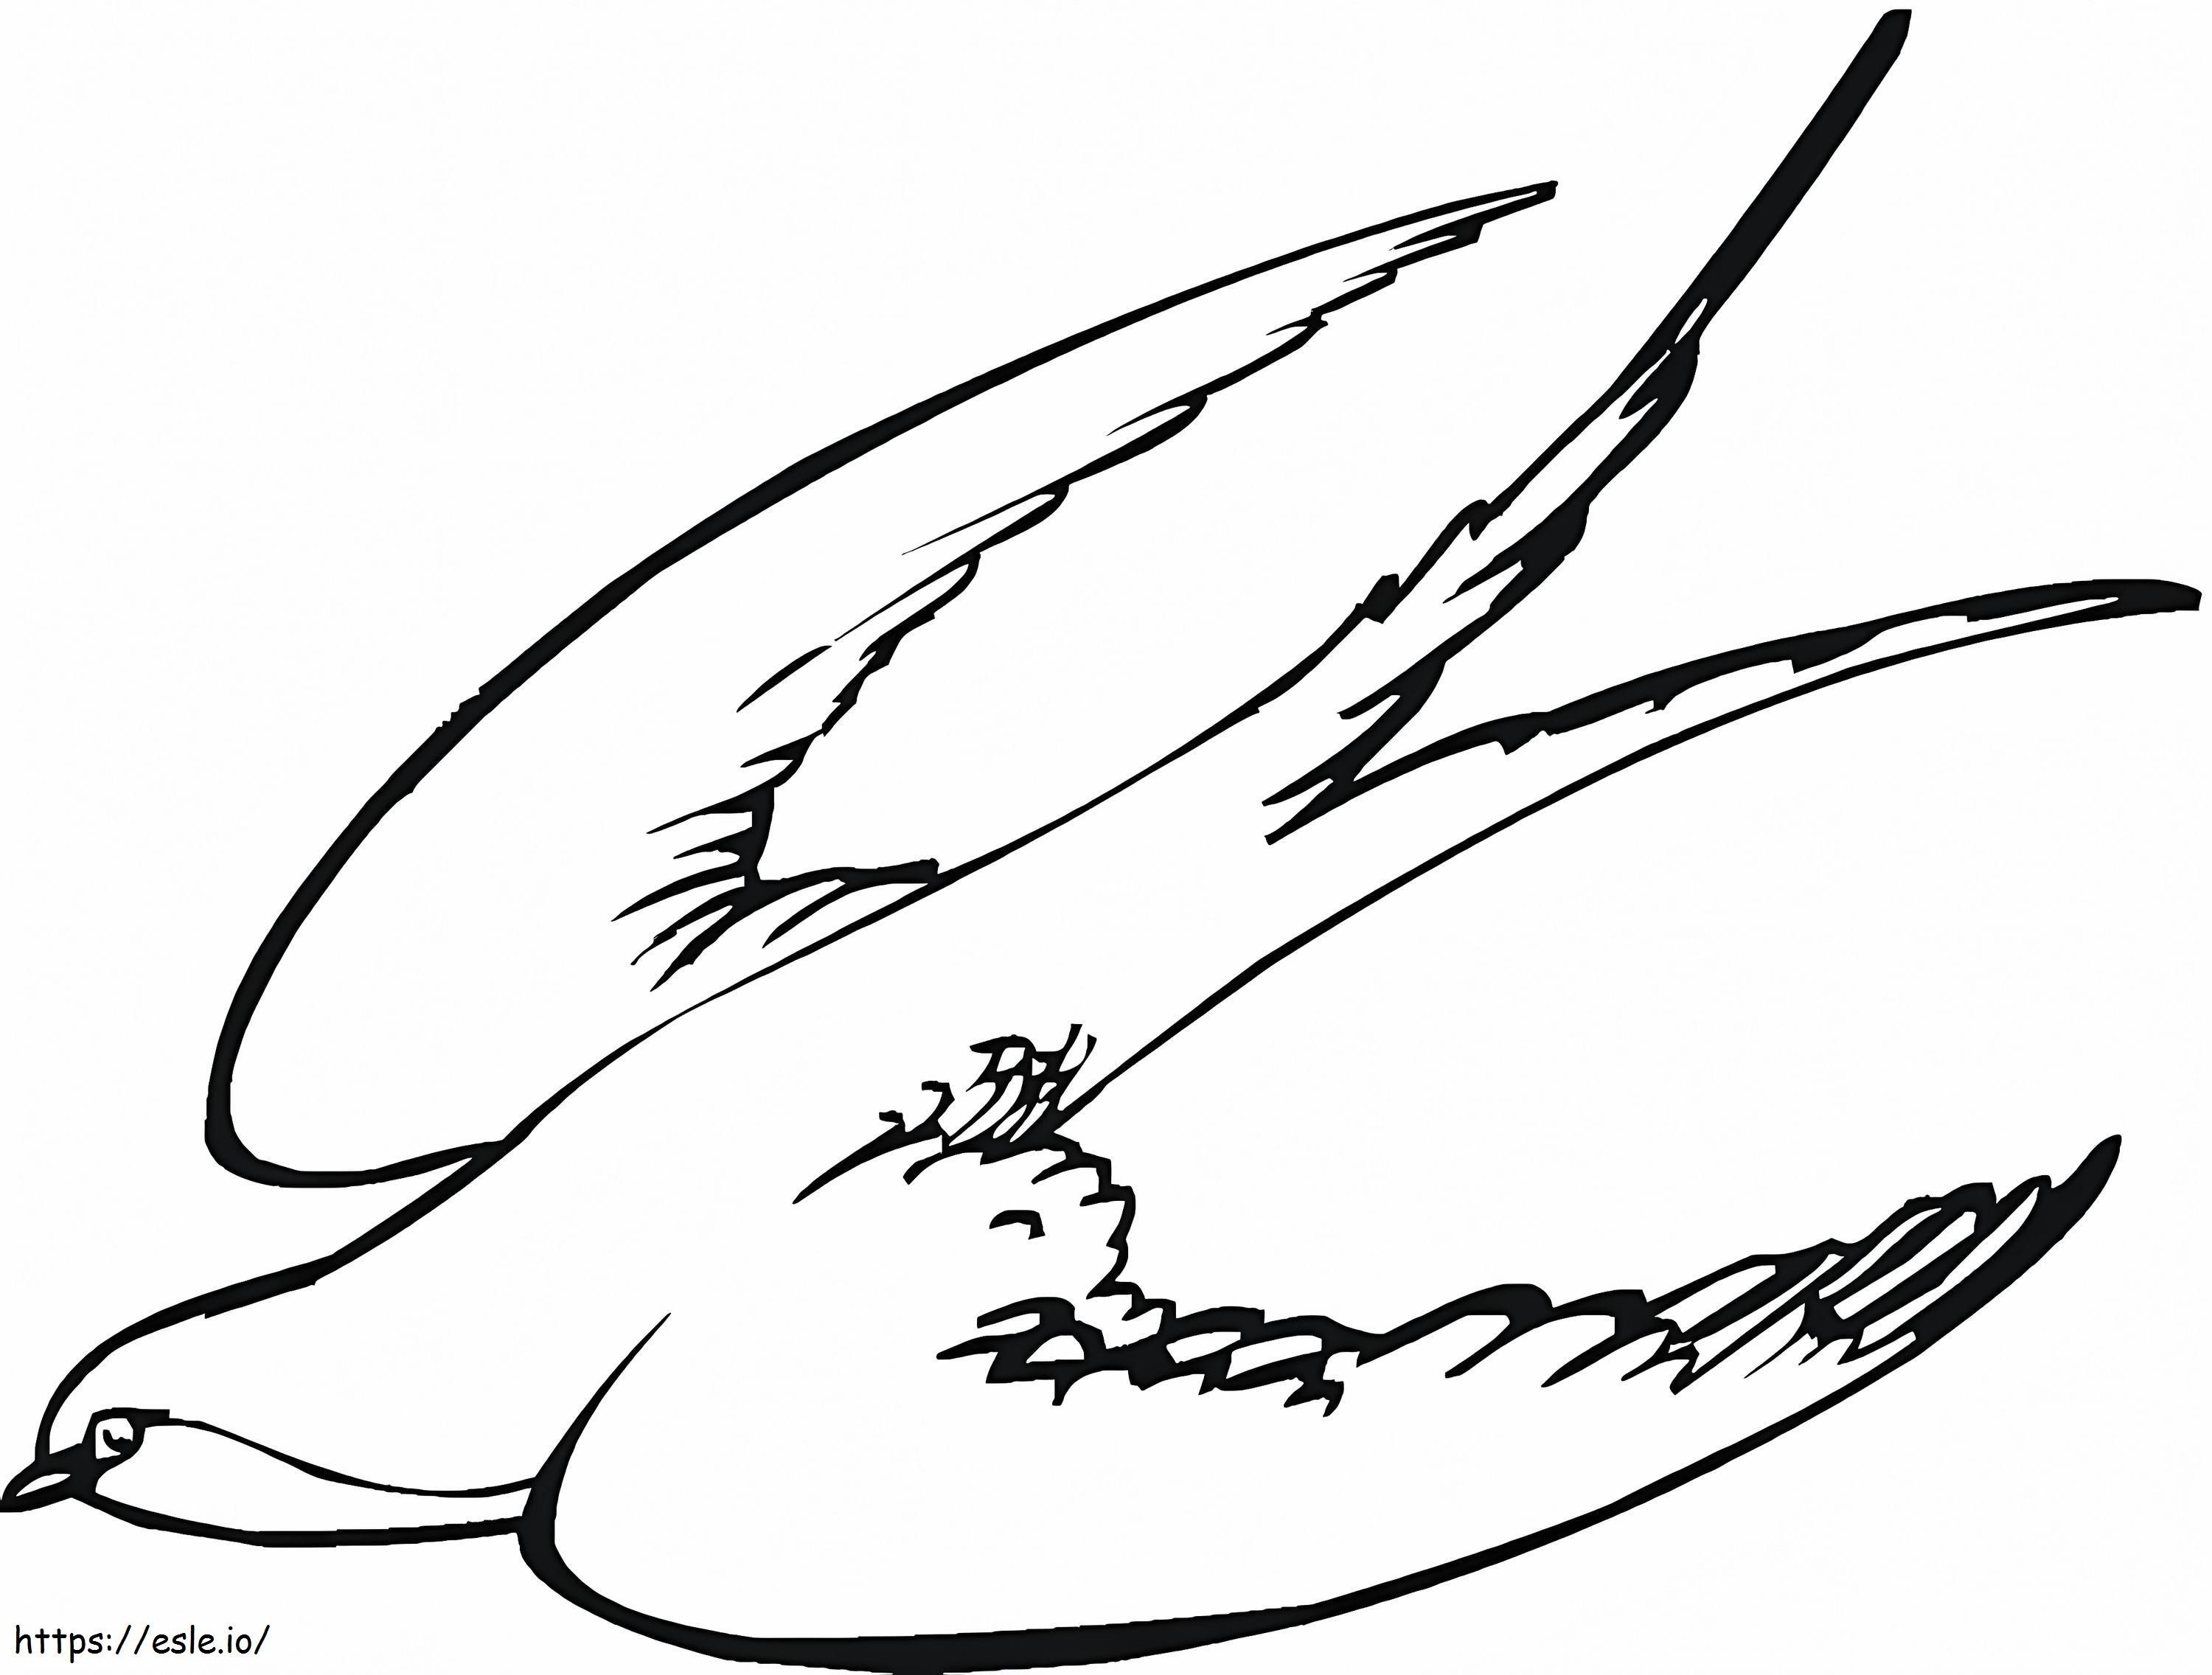 Swallow 1 coloring page